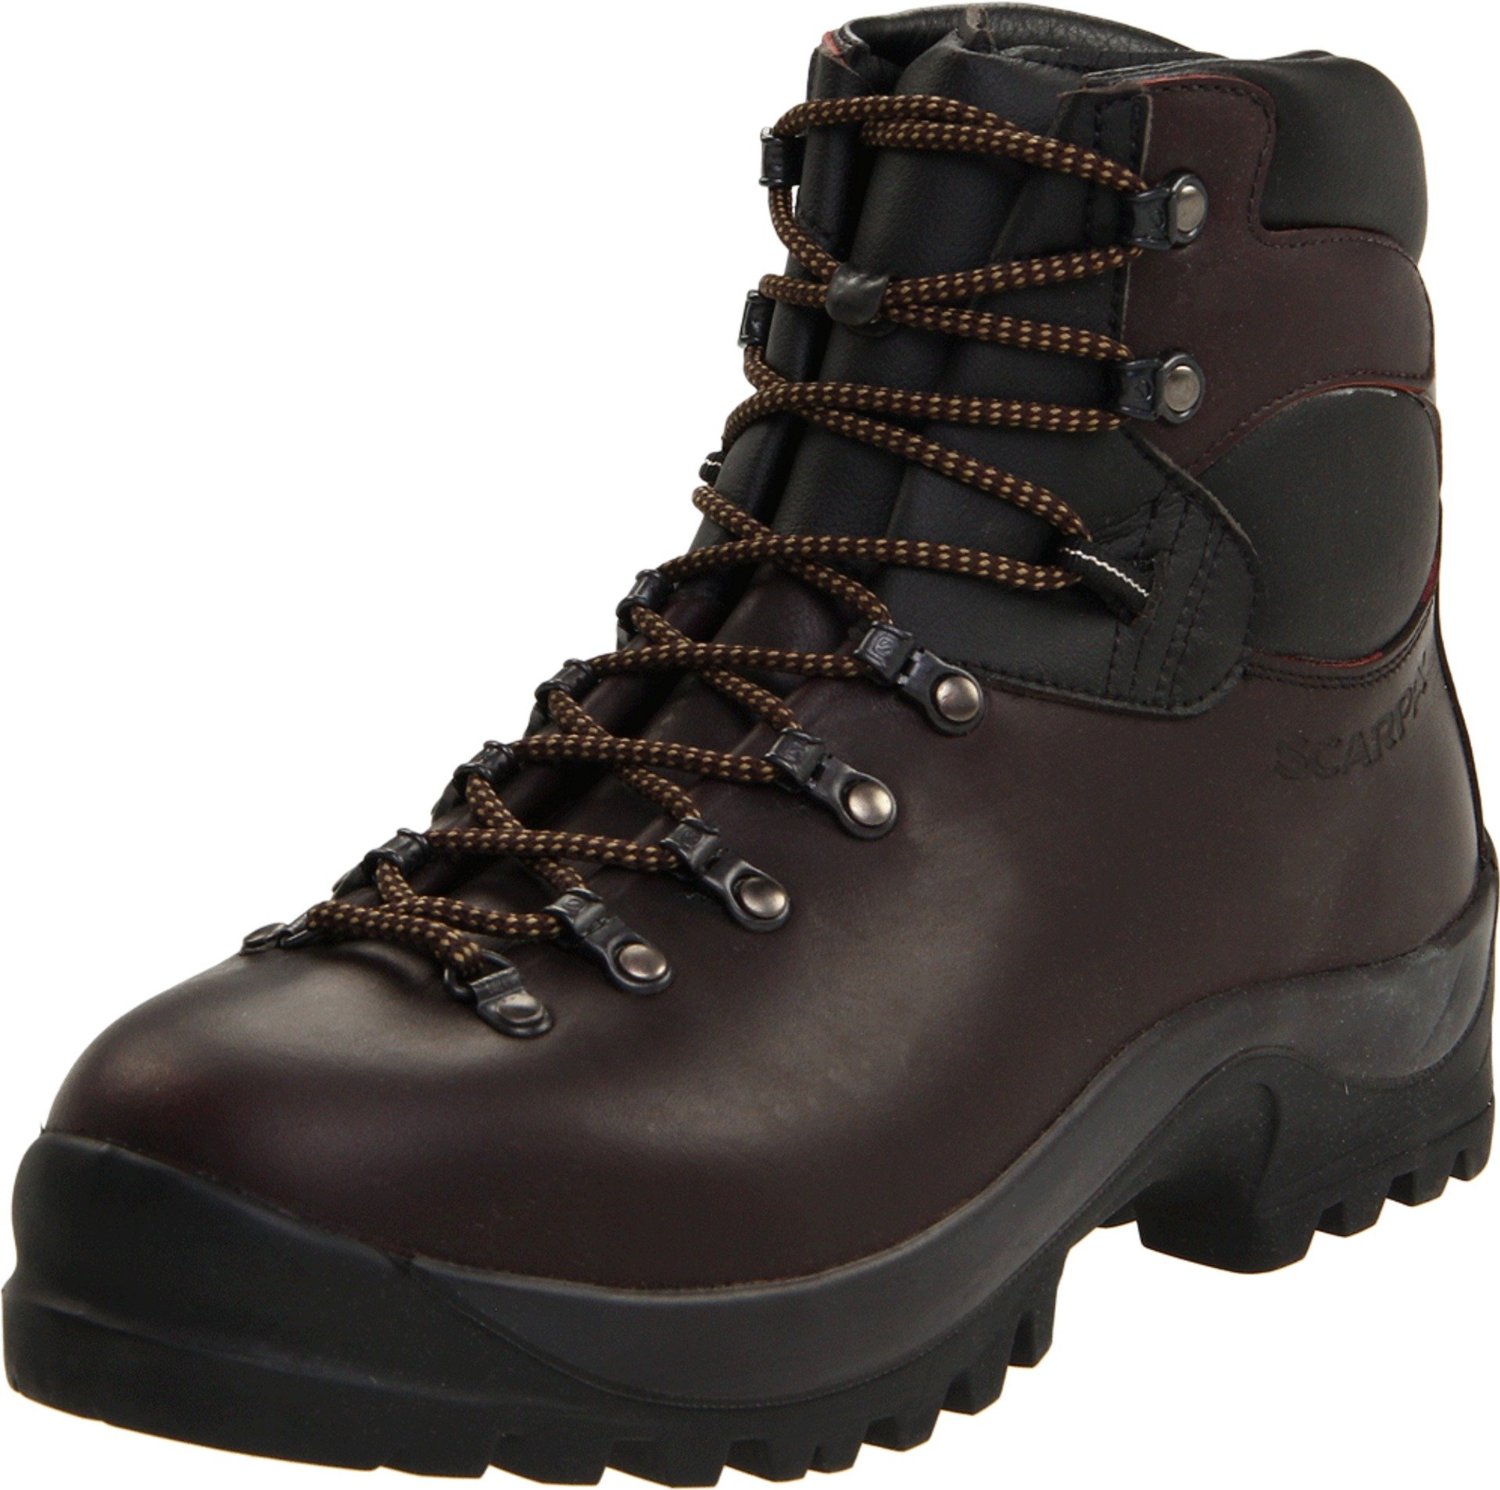 Hiking Shoes Here: SCARPA Men's SL M3 Backpacking Boot